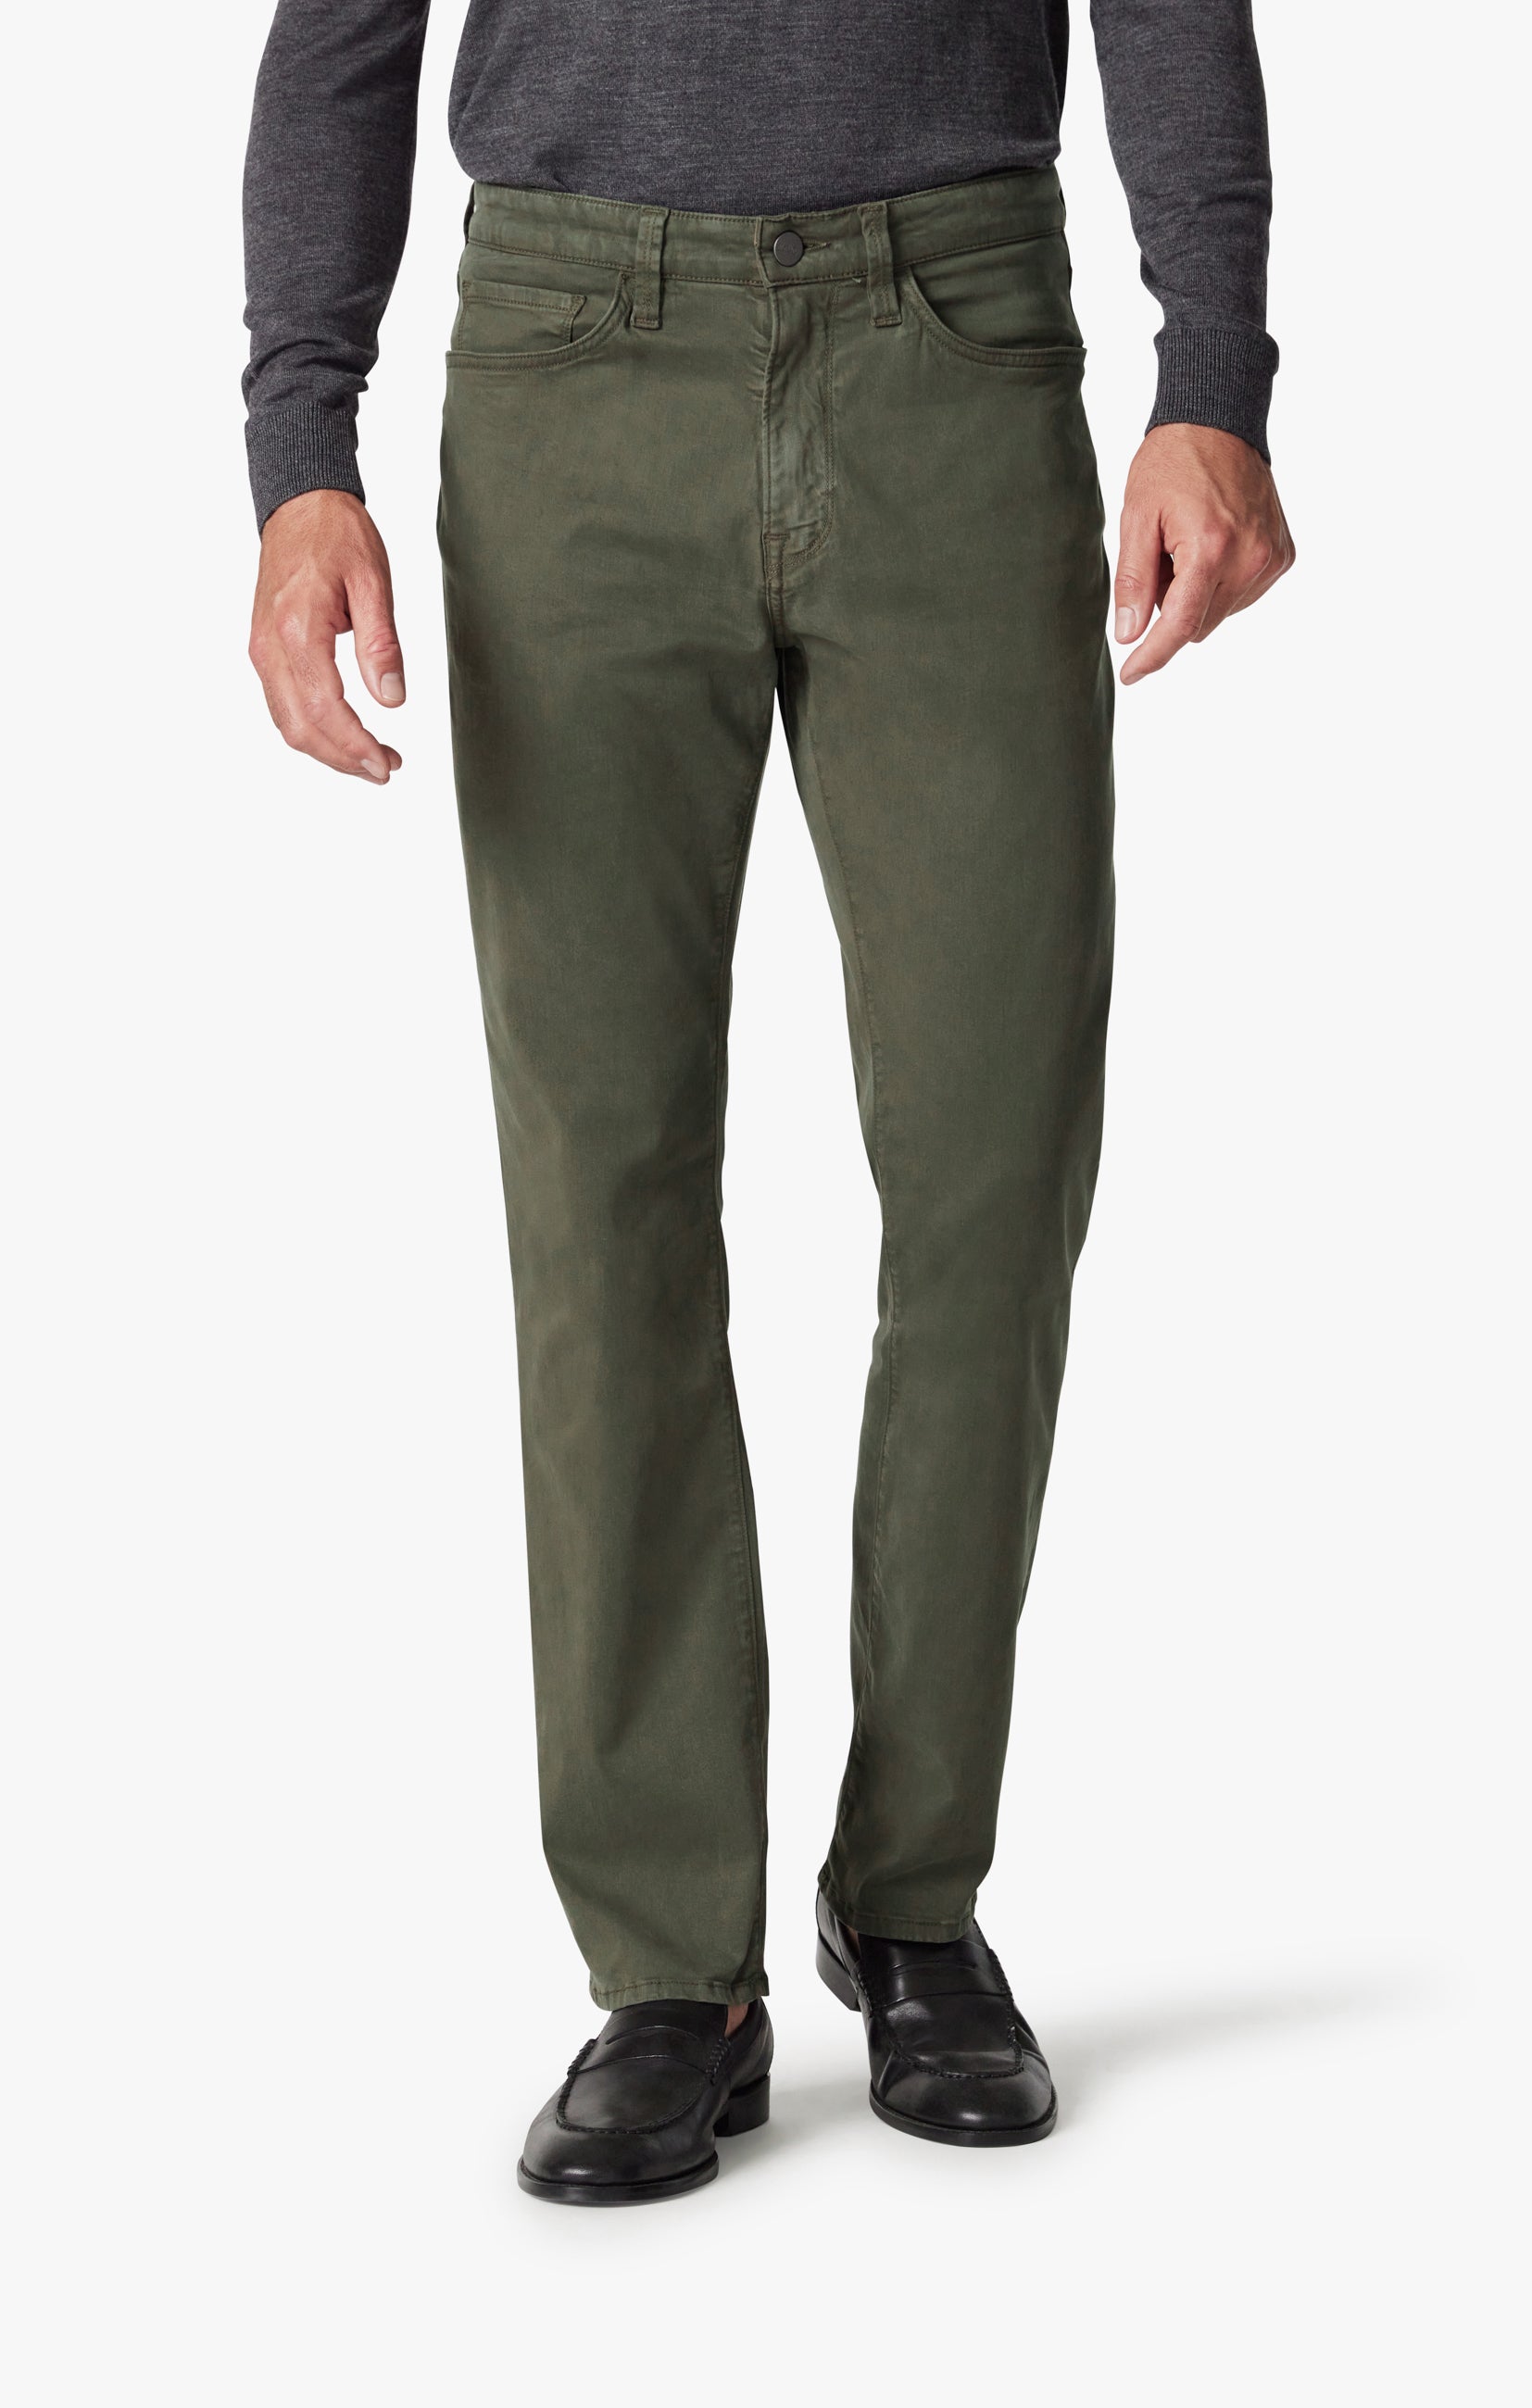 Charisma Classic Fit Pants in Green Twill Image 6